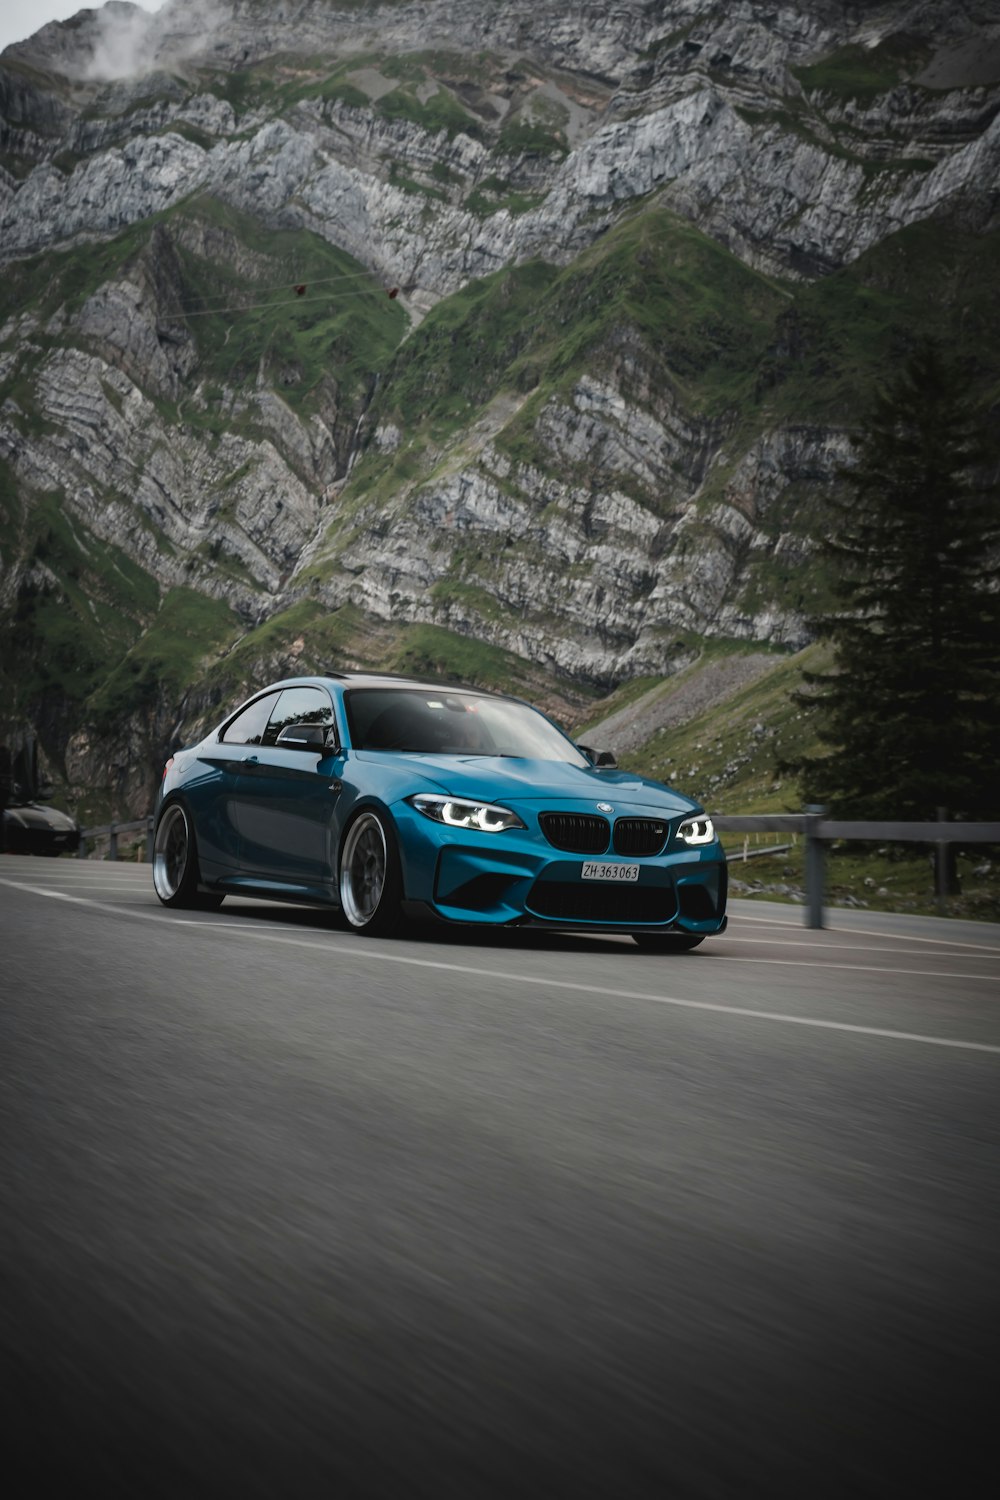 blue bmw m 3 on road during daytime